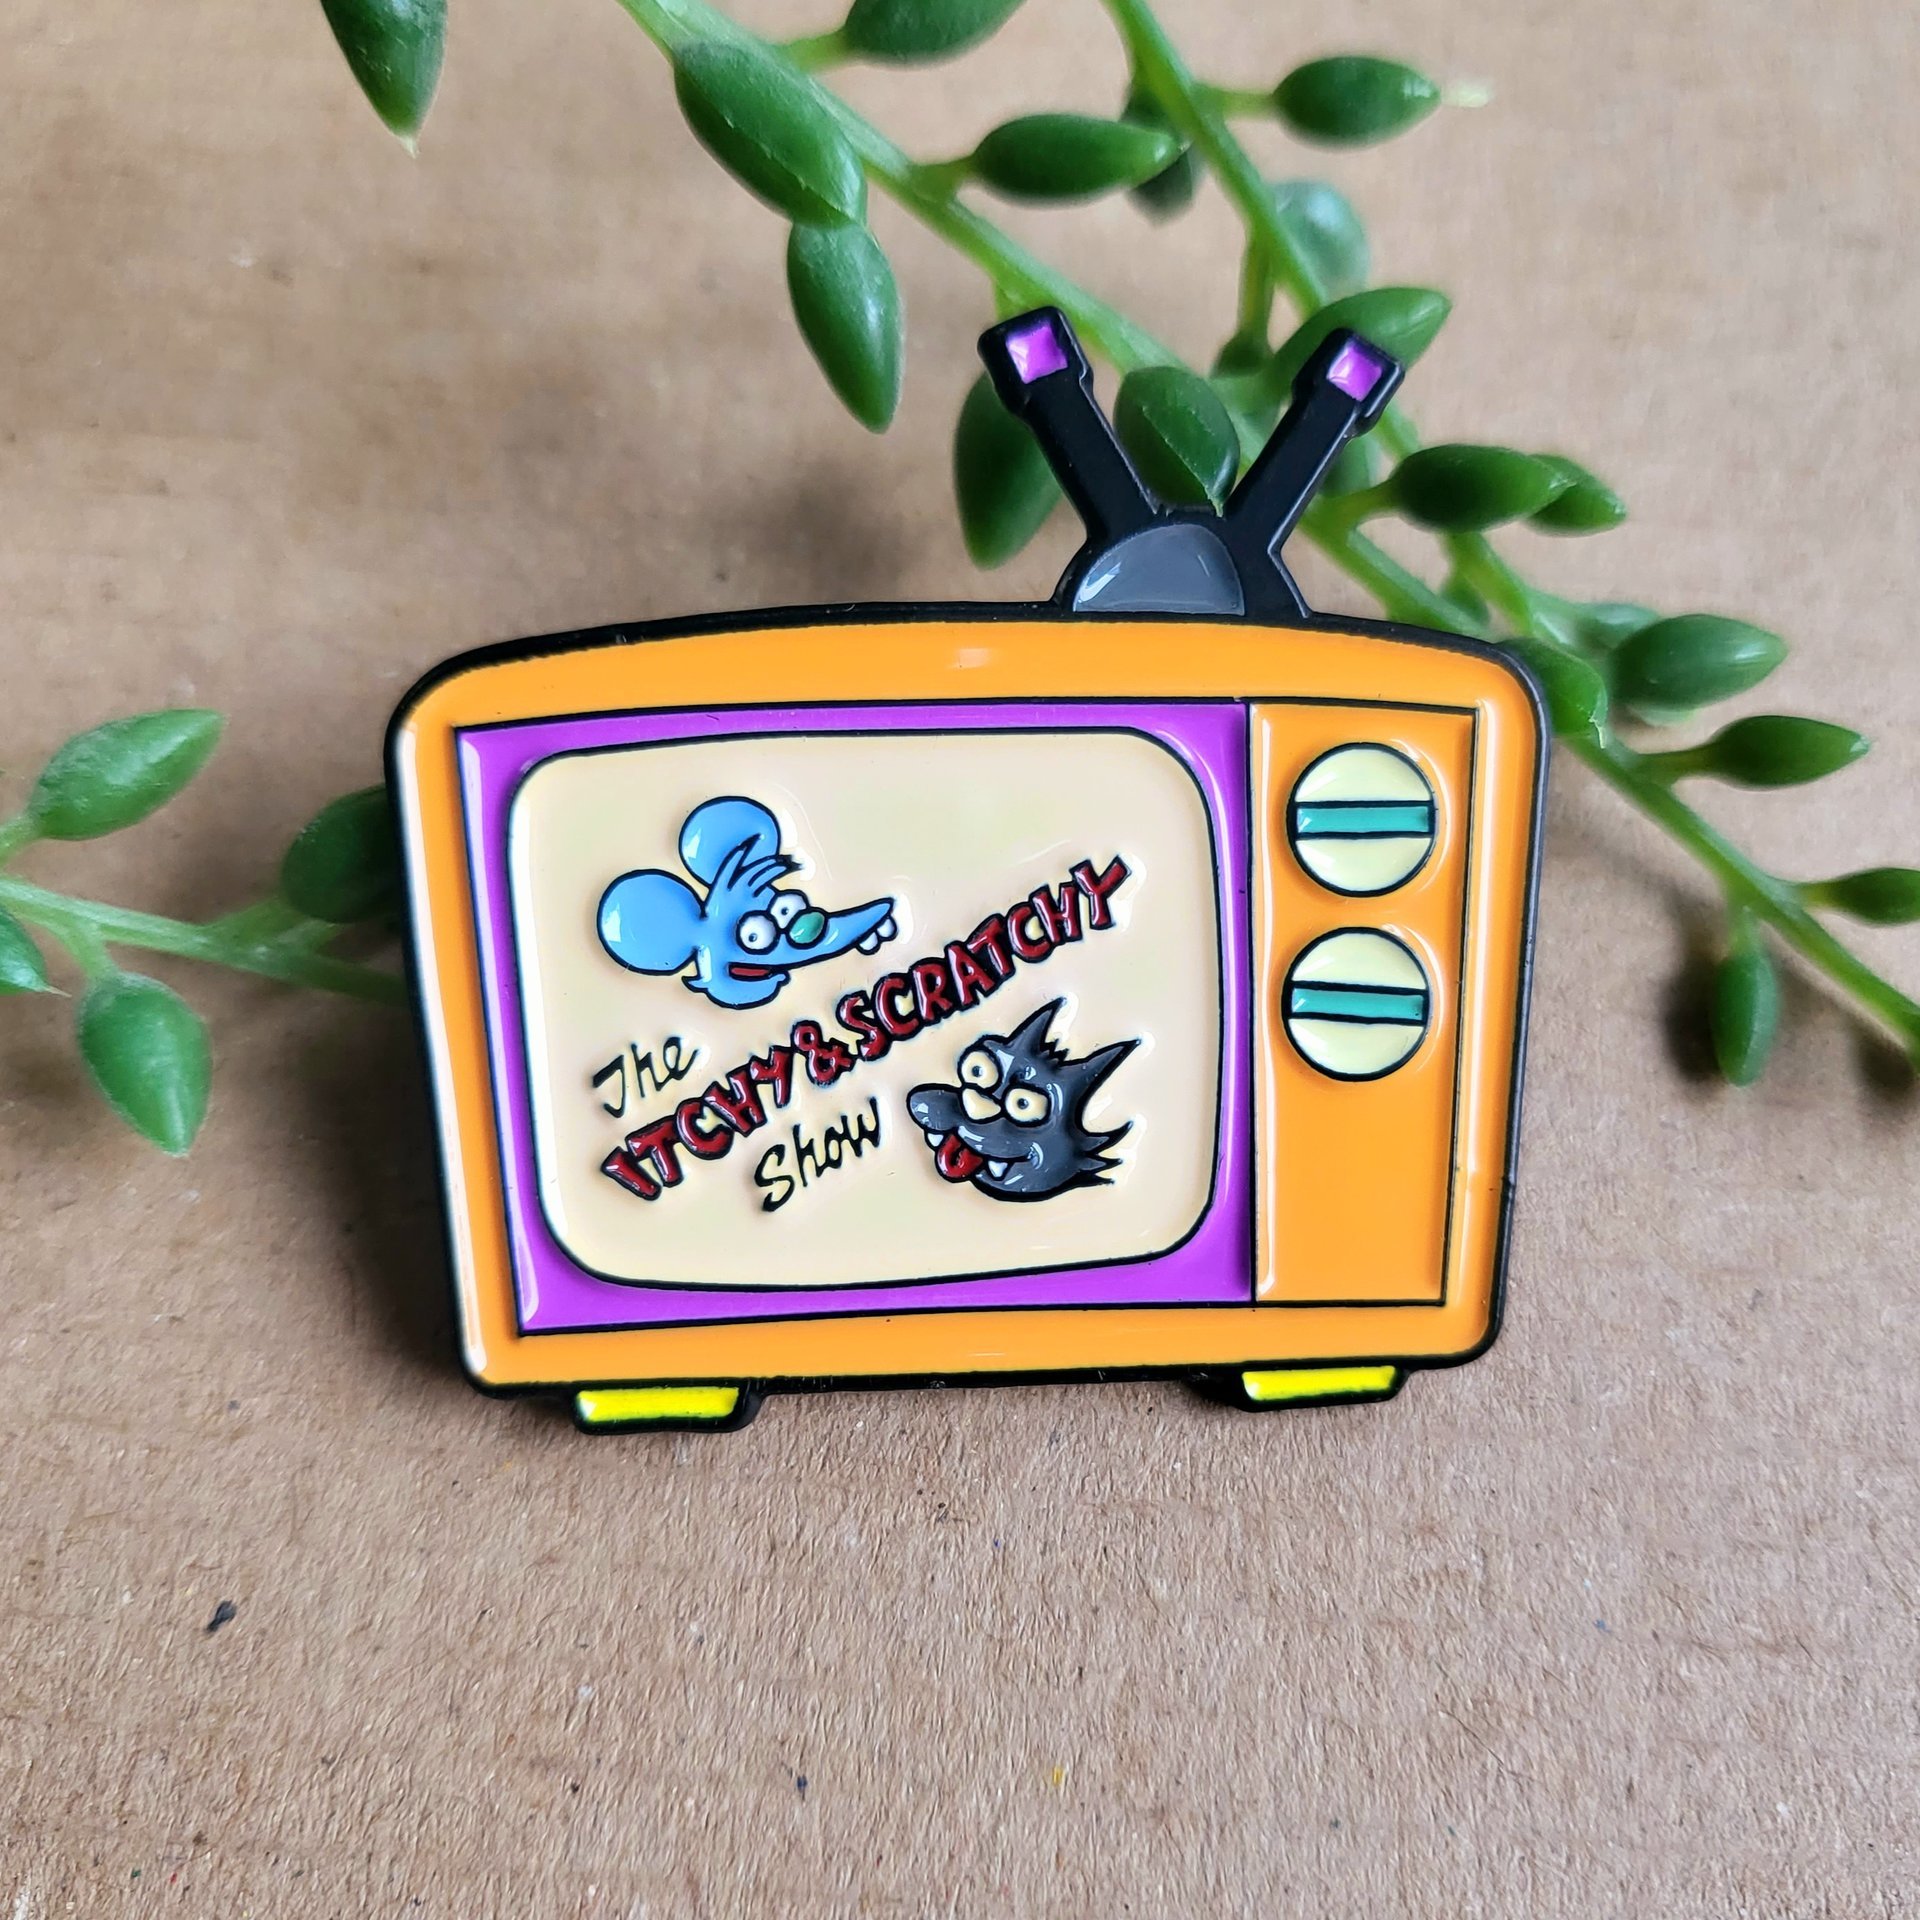 Itchy and Scratchy Enamel Pin badge